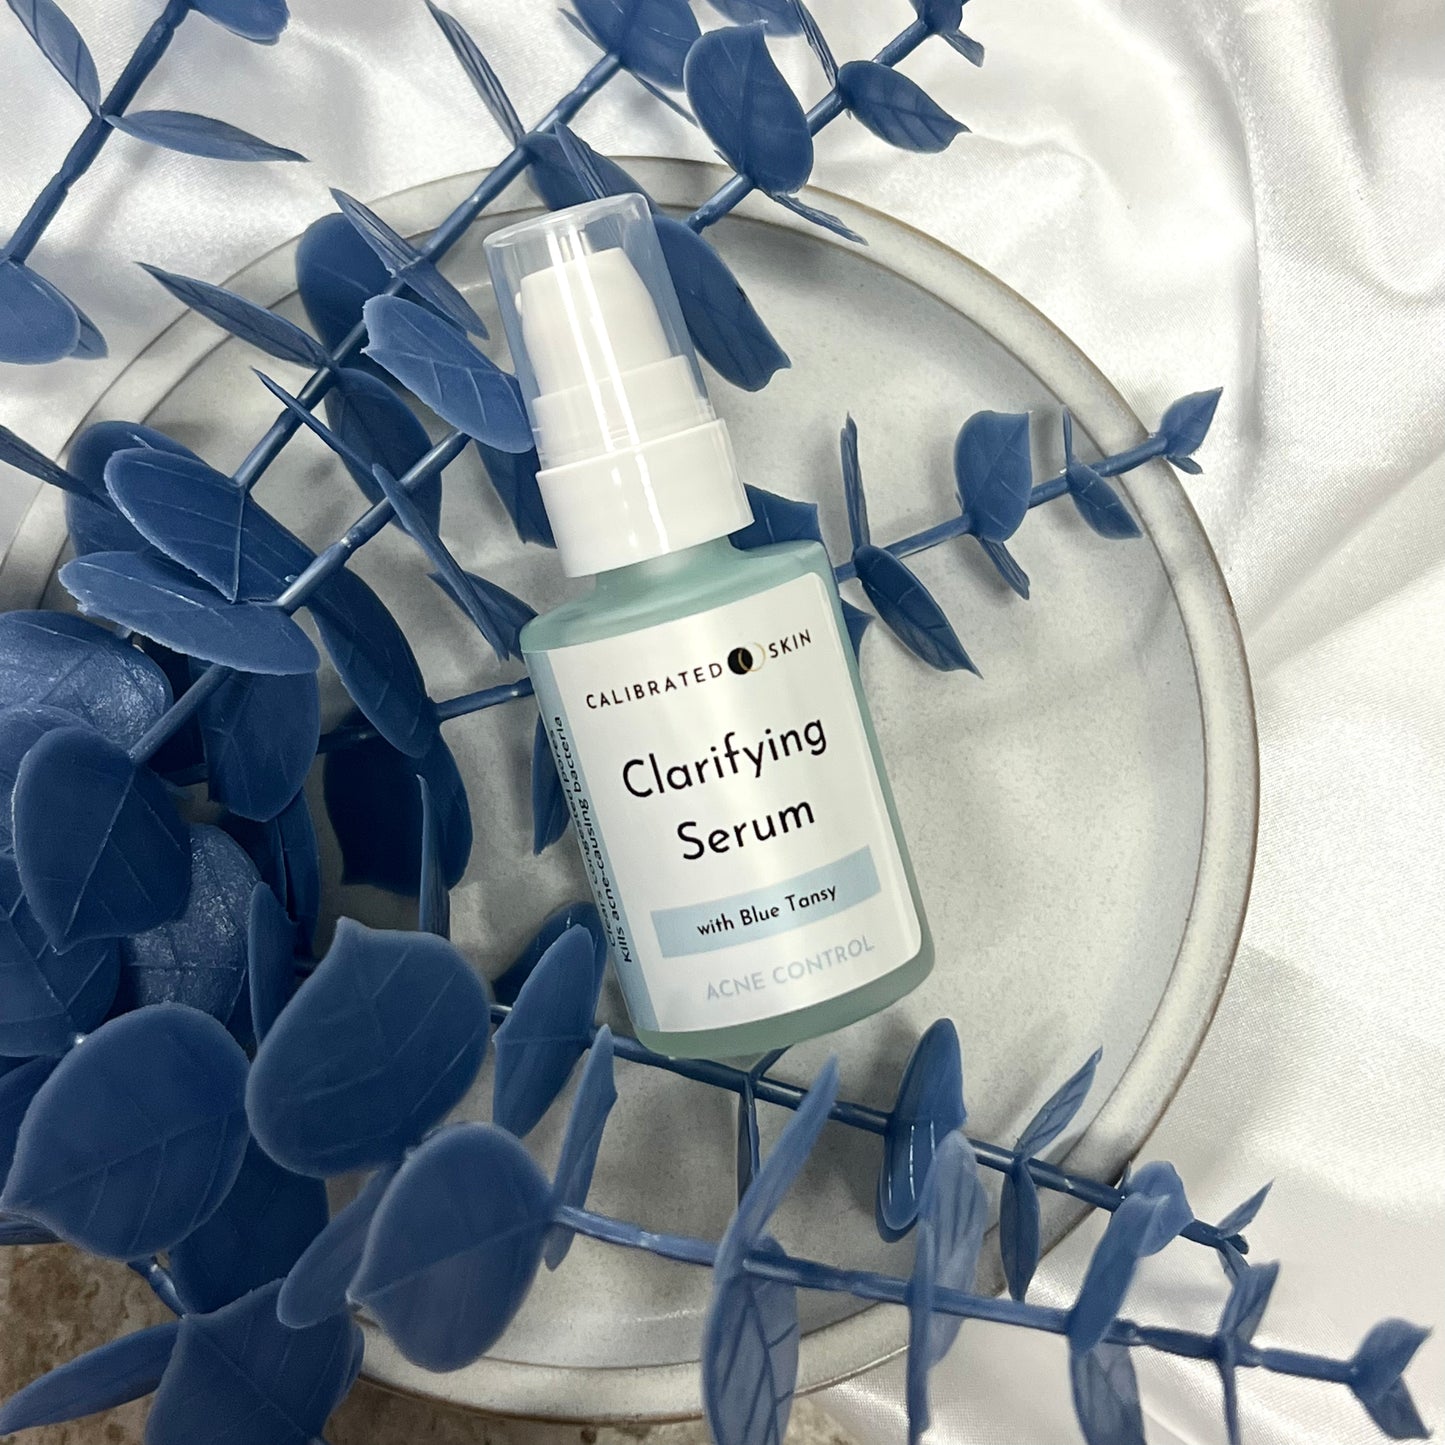 Clarifying Serum - targets congested pores, and kills acne causing bacteria